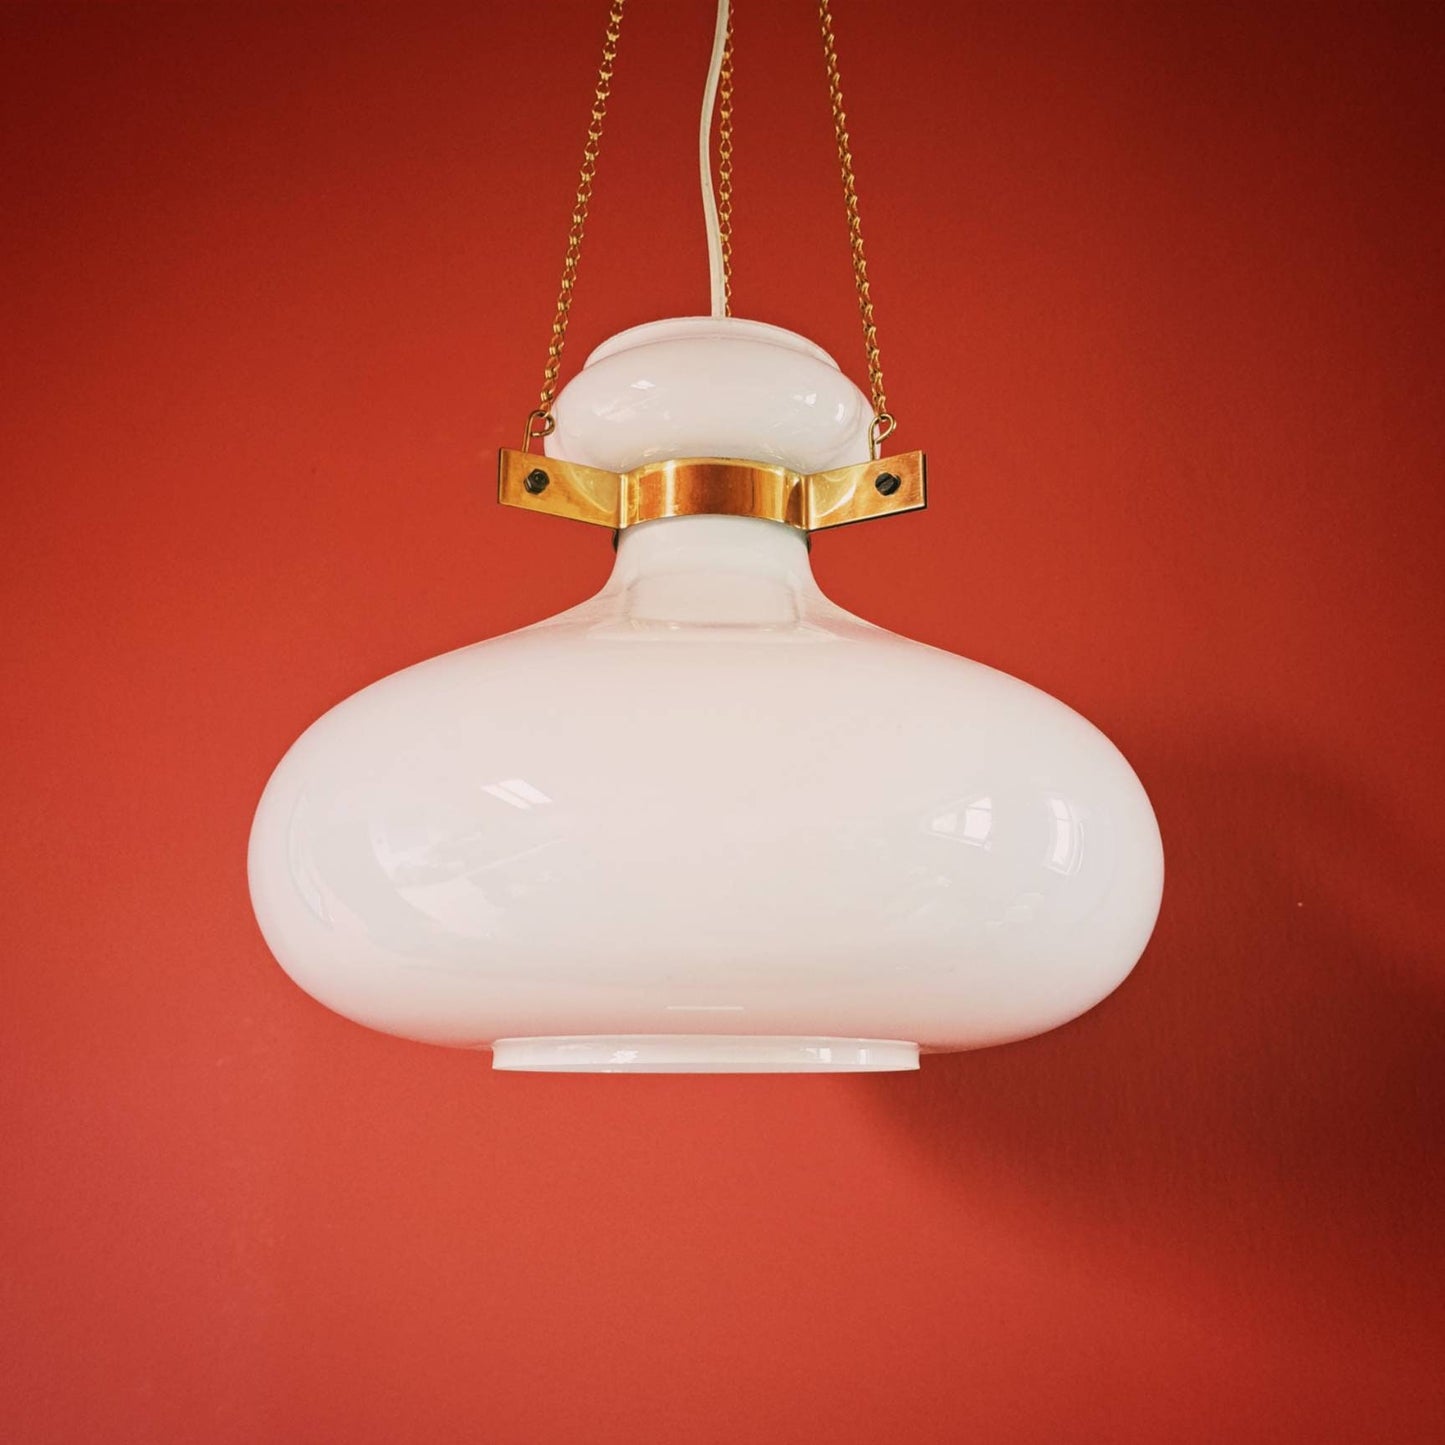 Vintage brass and opaline glass pendant light (2 available)